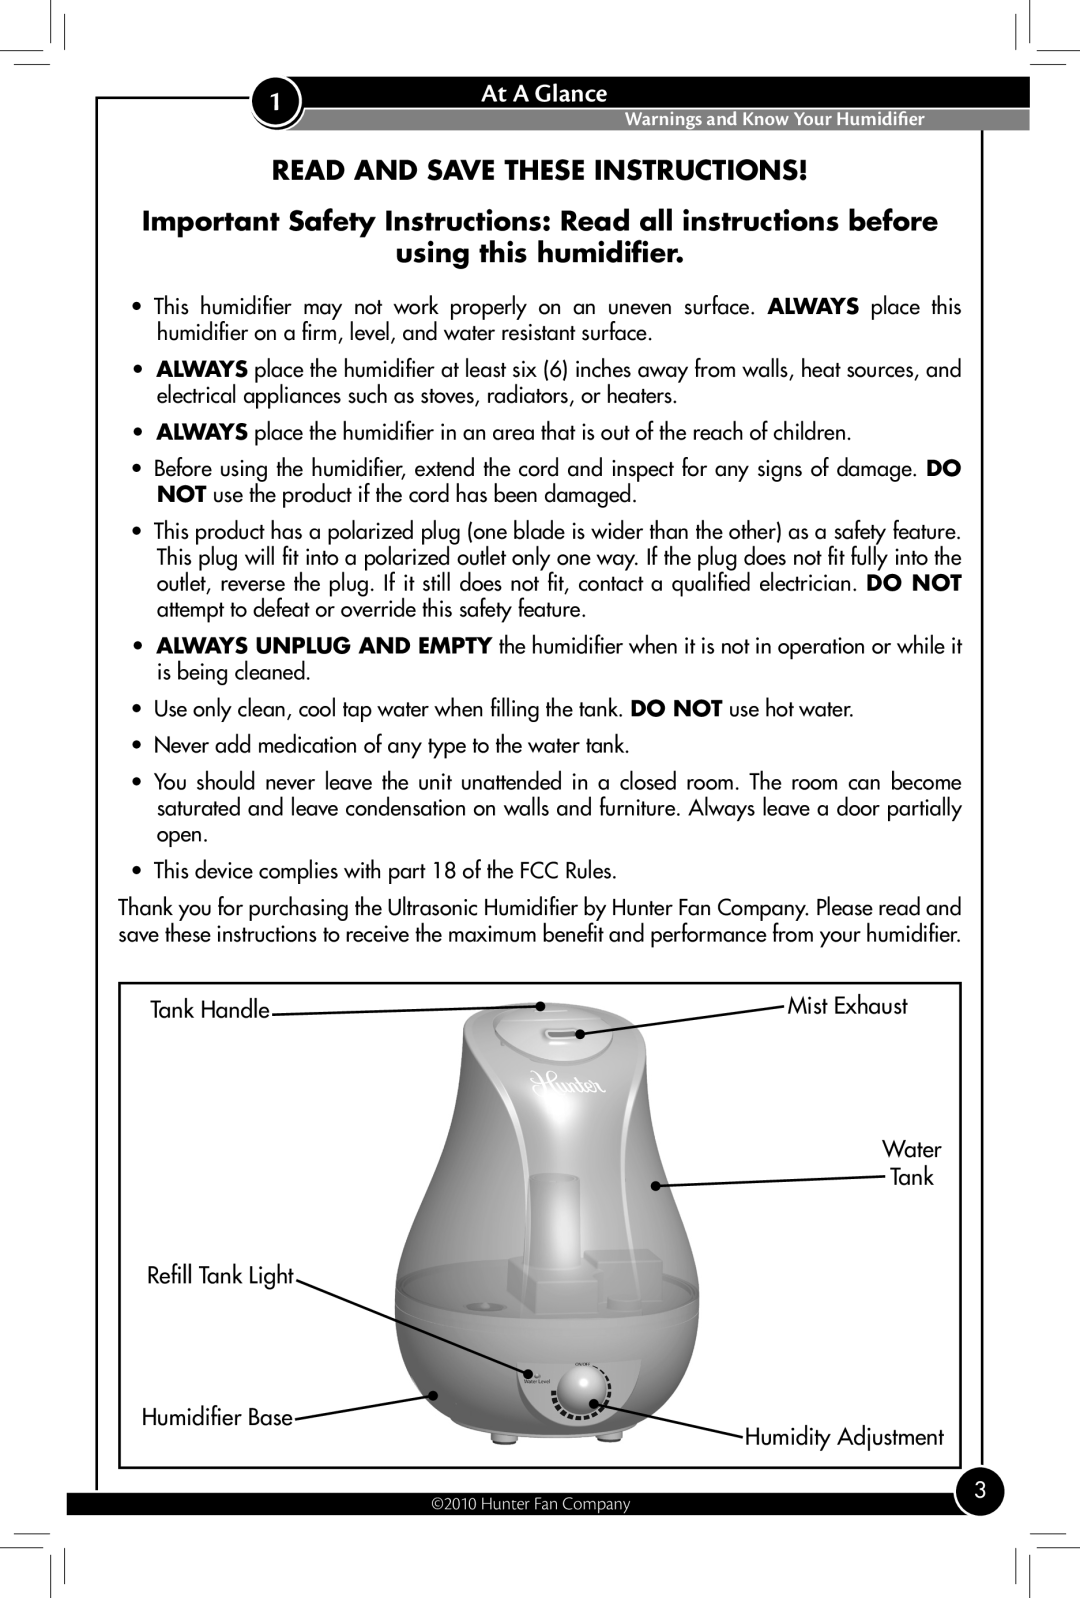 Hunter Fan 31004 At A Glance, Read and Save these instructions, using this humidifier, Tank Handle, Refill Tank Light 